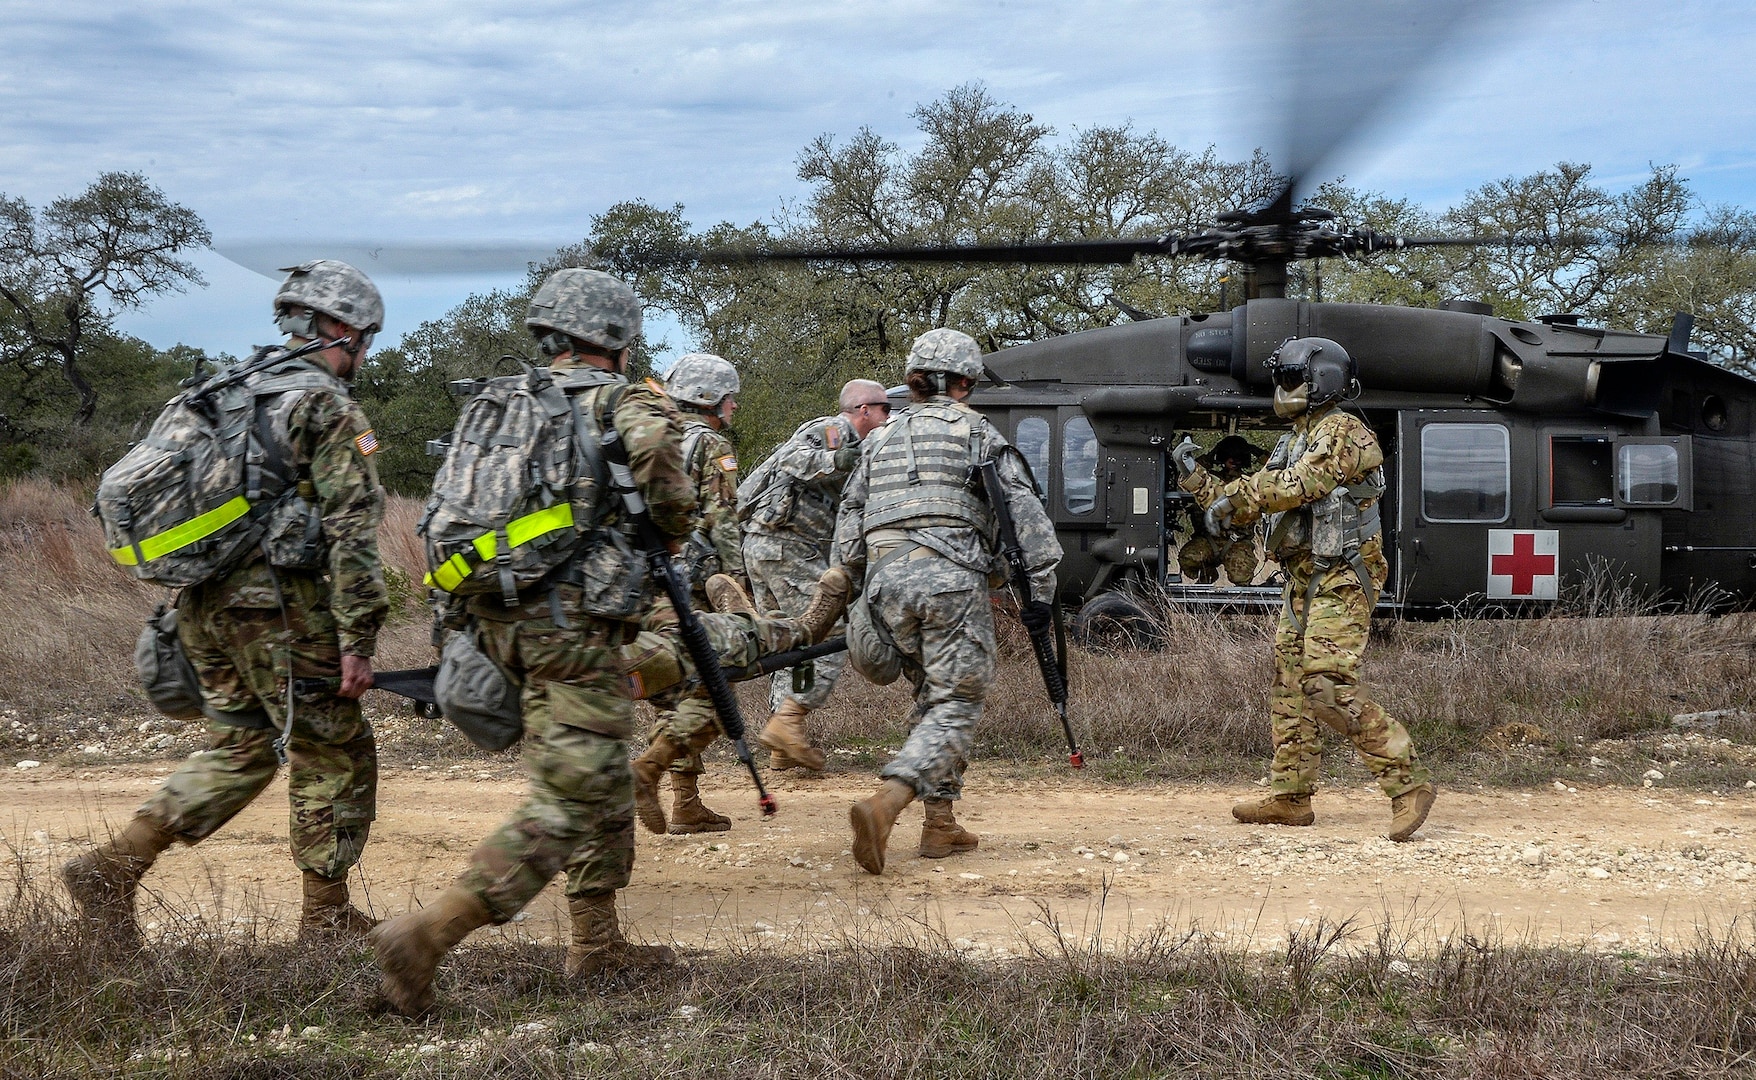 Students in the U.S. Army Medical Department Center and School Basic Officer Leader Course, or BOLC, carry a “wounded” service member on a stretcher towards a helicopter that will evacuate and transport the patient to a medical facility during a simulated tactical exercise February 26 at Joint Base San Antonio-Camp Bullis. The students, who are incoming commissioned Army officers, learned how to treat, move and transport wounded and injured service members in simulated combat settings, including a convoy that is ambushed and damaged by an improvised explosive device. BOLC is the entry level course for students who are becoming commissioned officers in the Army and is conducted in two phases over seven weeks, including classroom training and field training. The objective of the course is to train new officers in Army tasks and familiarize them with the AMEDD culture.